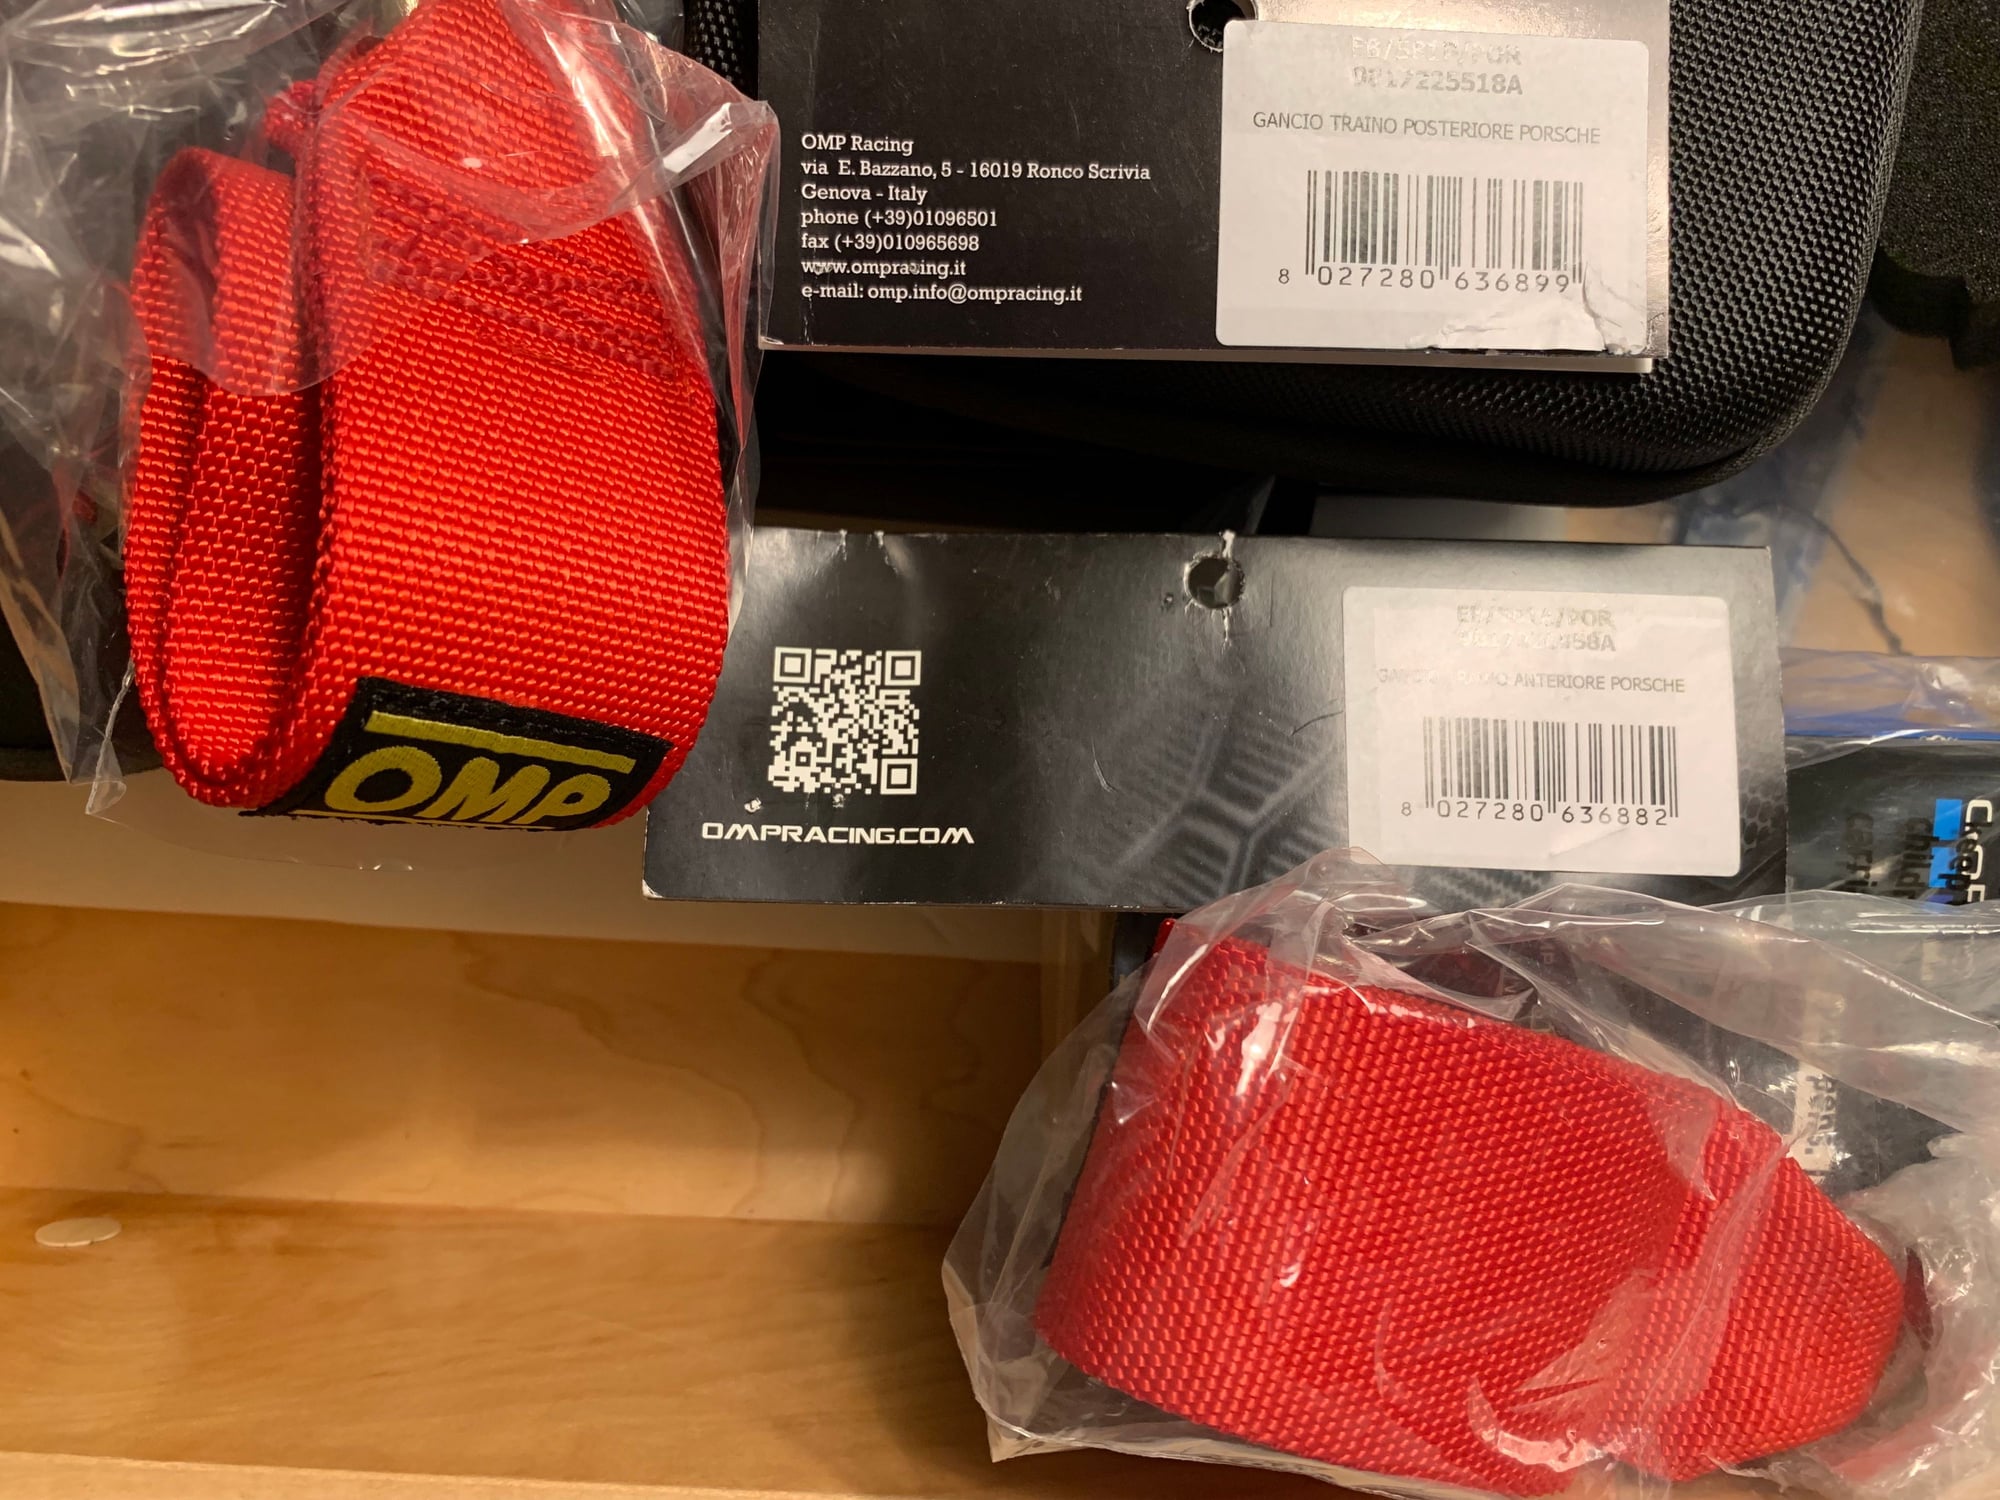 Accessories - For Sale: Authentic Porsche Motorsport OMP Tow Hook Straps - New - 2014 to 2016 Porsche GT3 - 2013 to 2019 Porsche 911 - 2013 to 2019 Porsche Boxster - 2013 to 2019 Porsche 718 Boxster - 2014 to 2019 Porsche 718 Cayman - 2014 to 2019 Porsche Cayman - Santa Monica, CA 90404, United States